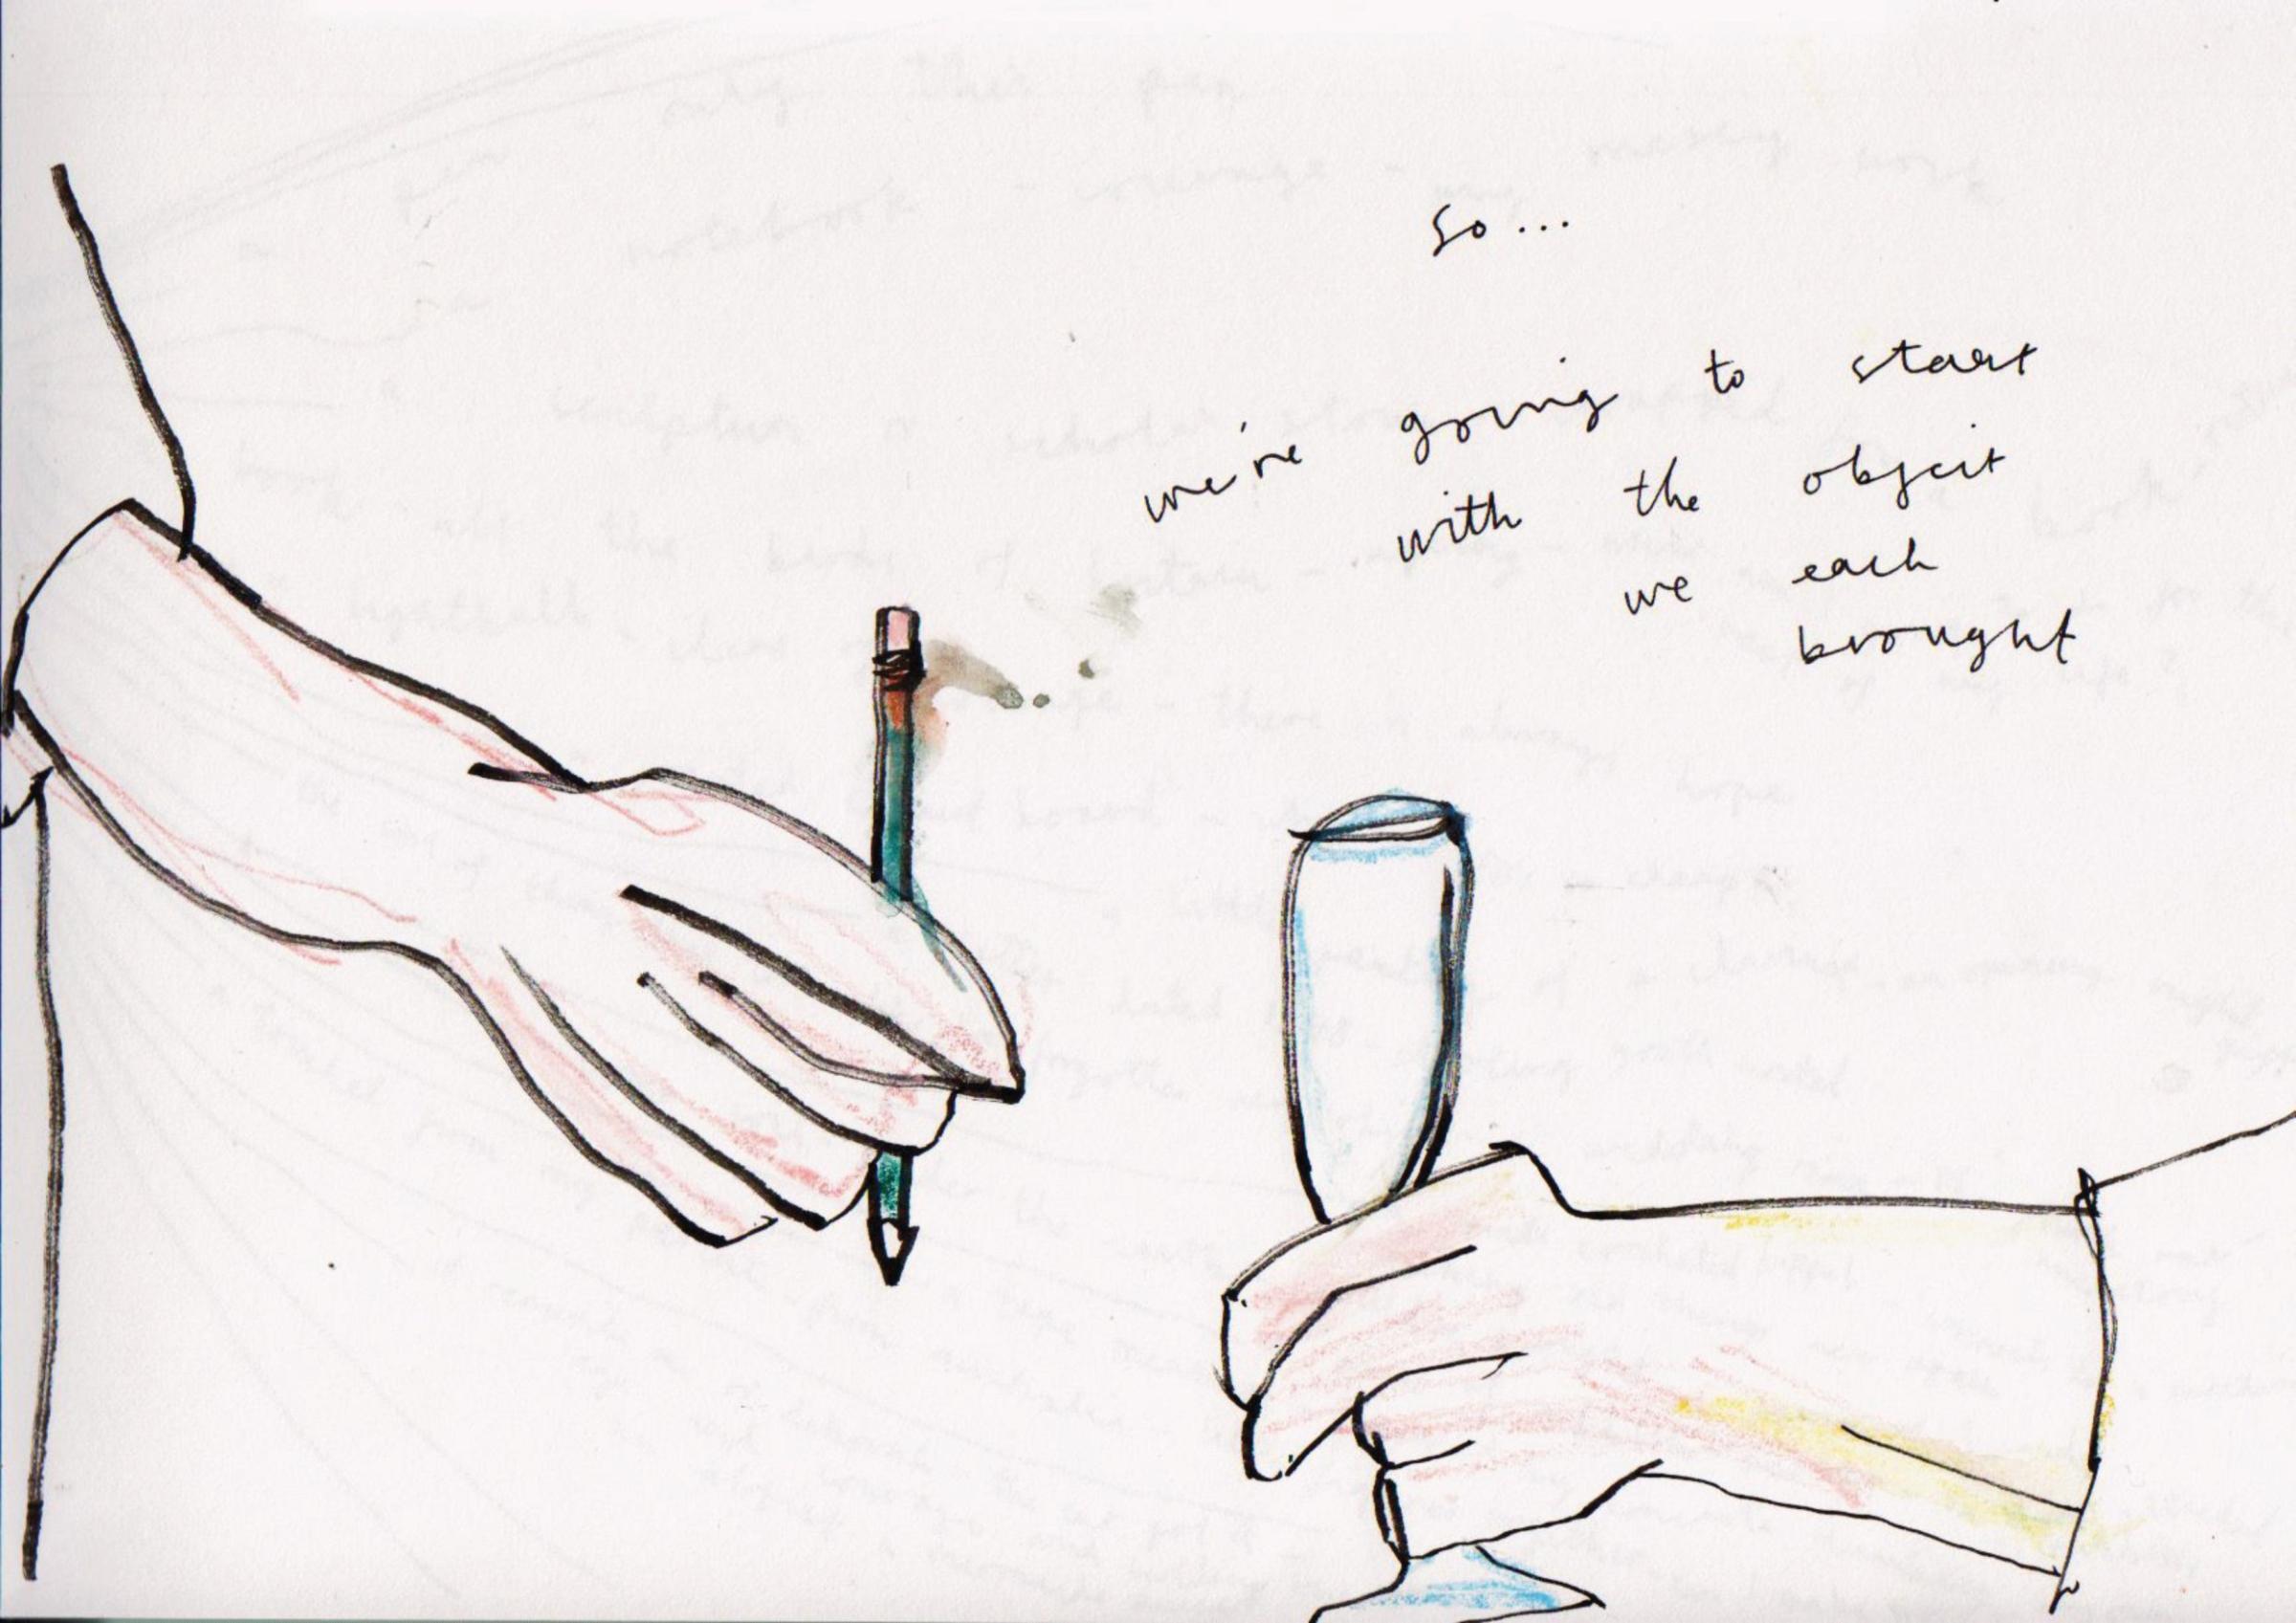 Sketch of two hands, one holding a champagne flute and another holding a pencil. Text reads 'So we're going to start with the object we each brought'